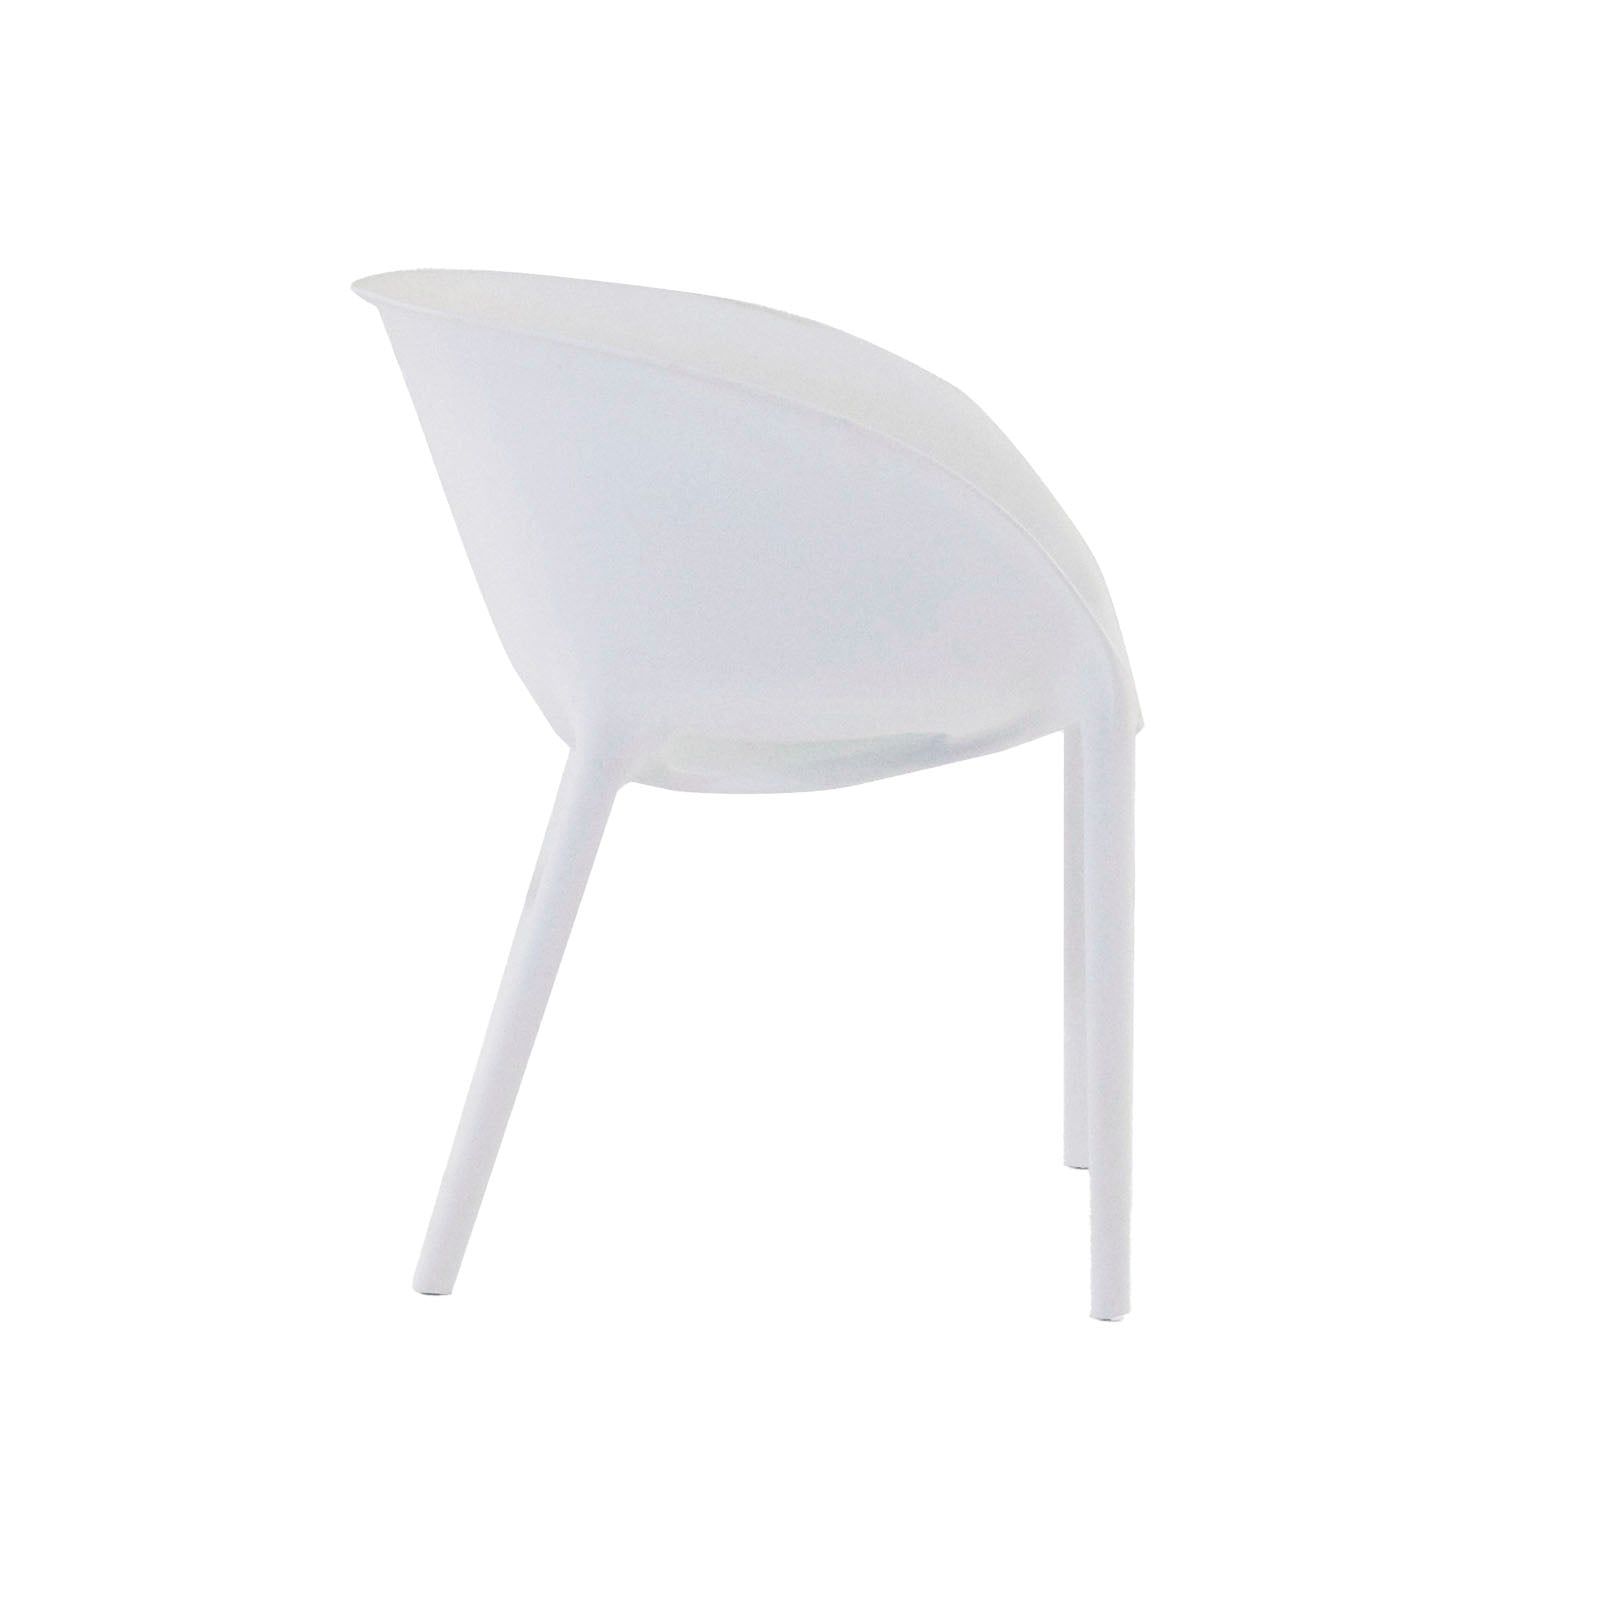 Design Warehouse - 124521 - Curve Cafe Dining Chair (White)  - White